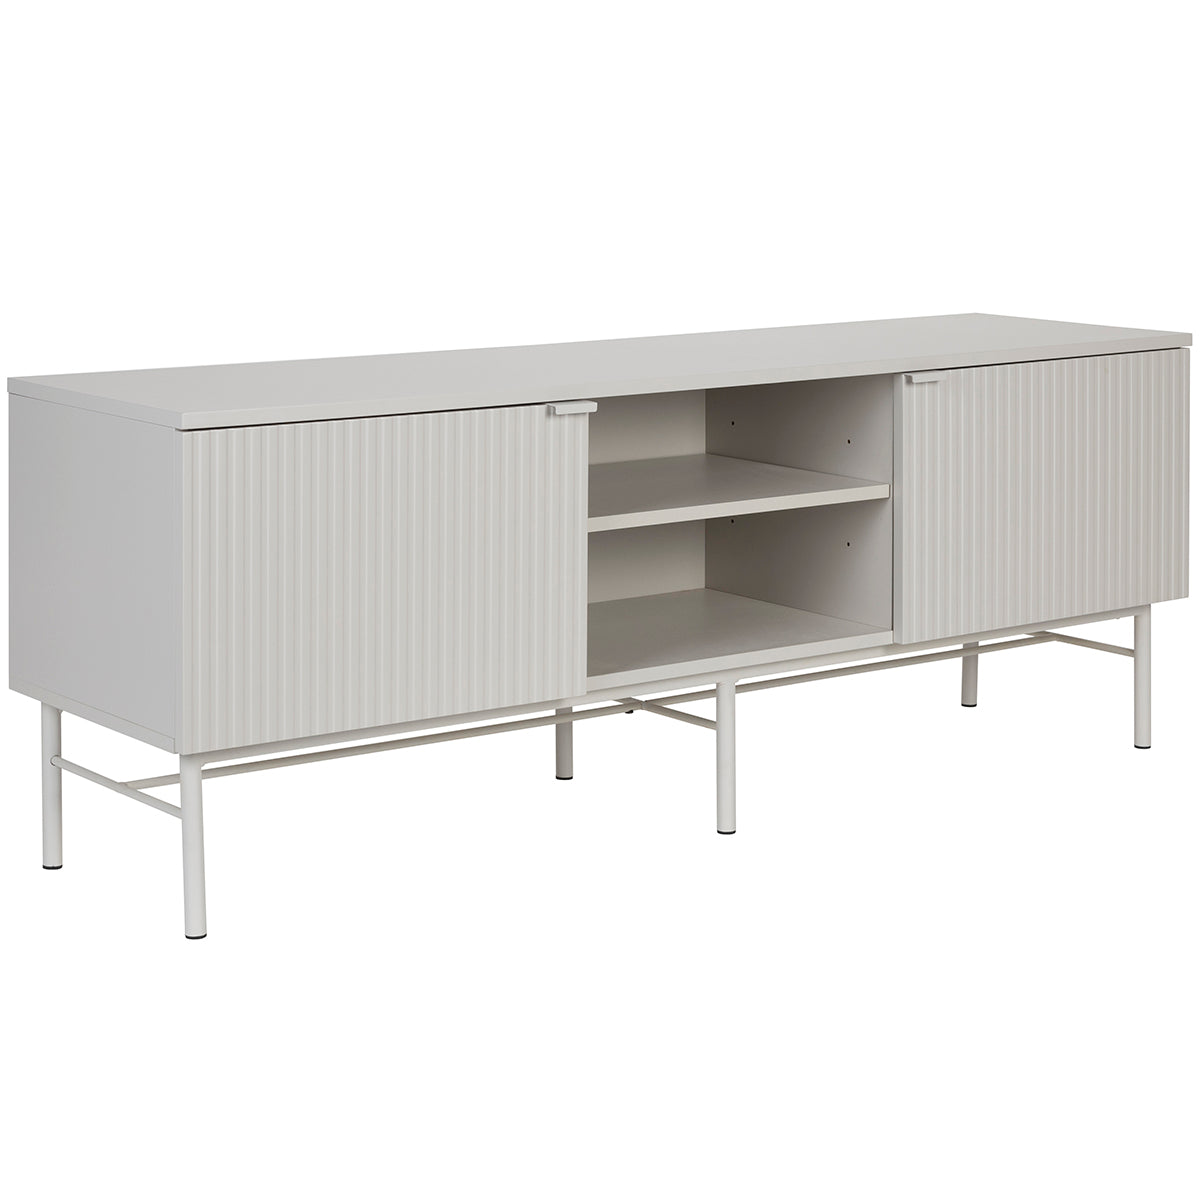 Cayo White Low Sideboard